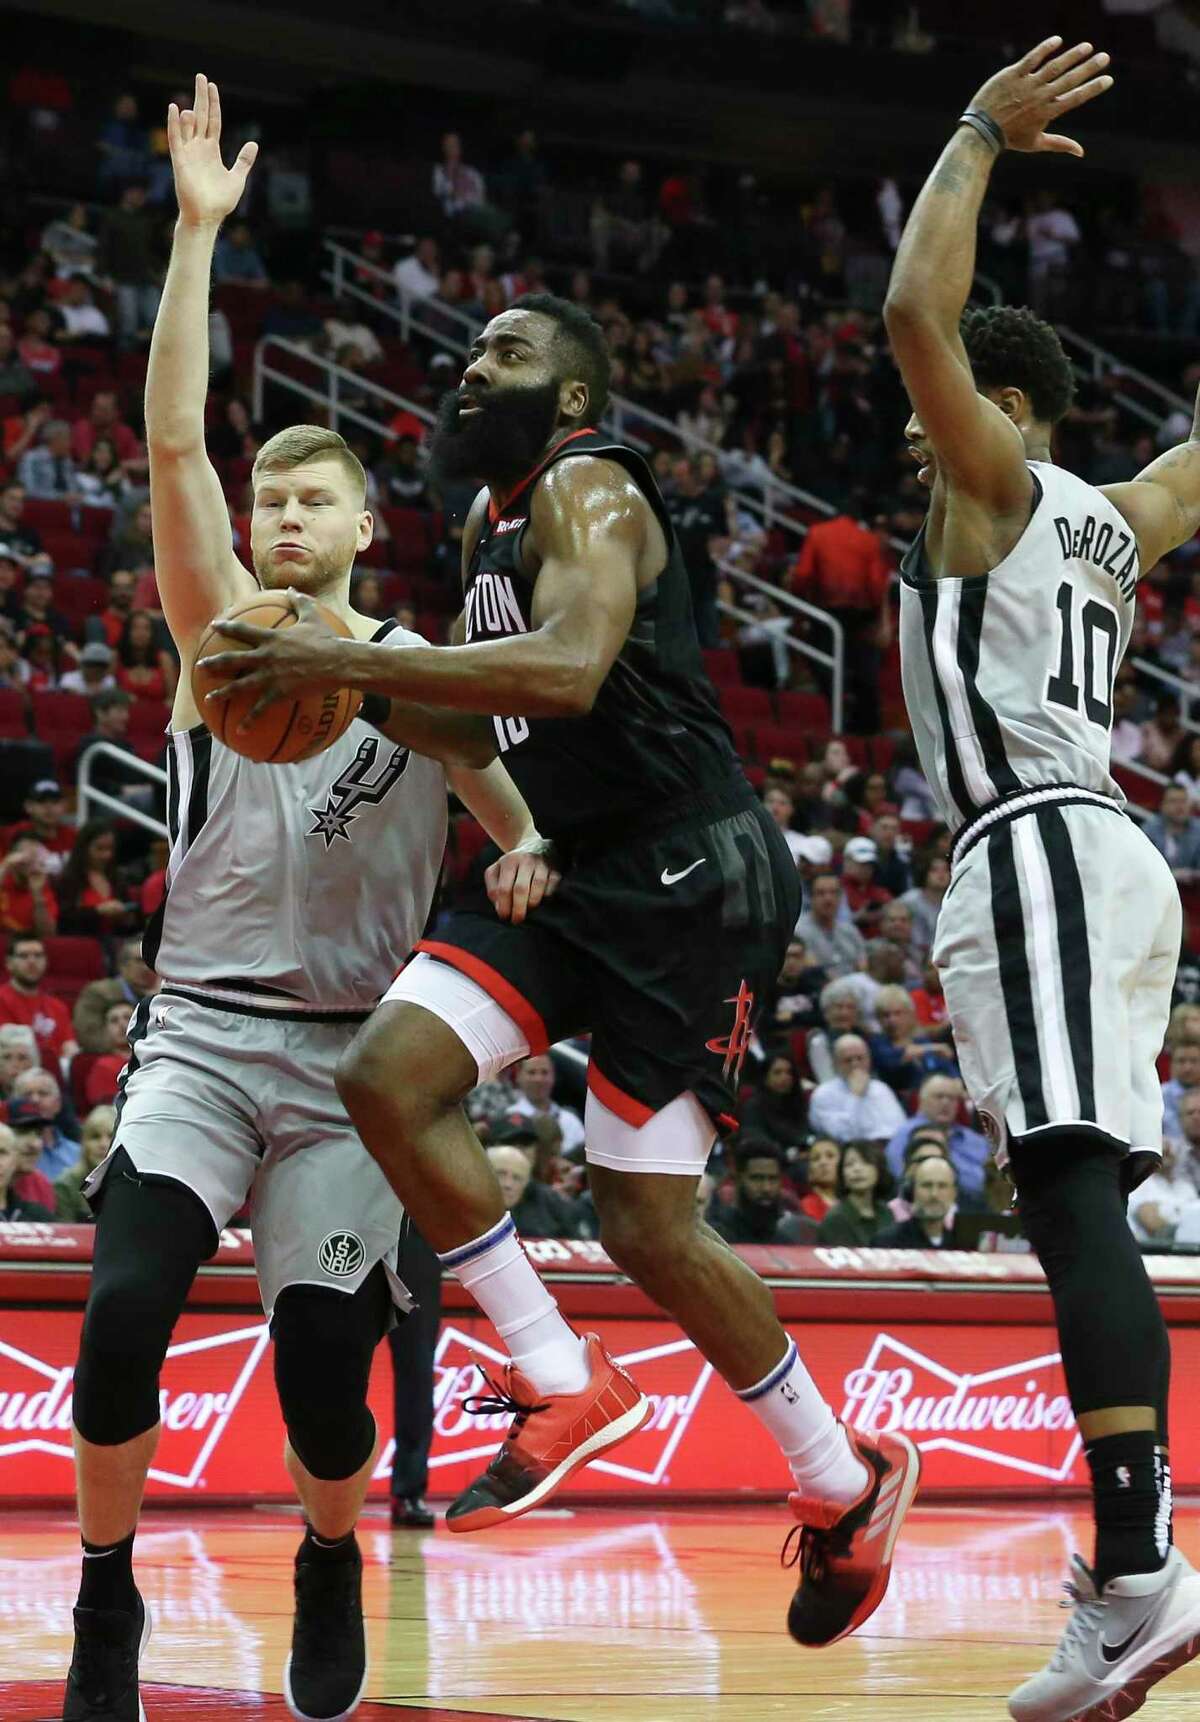 Houston Rockets guard James Harden (13) goes toward the basket while San Antonio Spurs players Davis Bertans (42) and DeMar DeRozan (10) are defensing during the first quarter of the NBA game at Toyota Center on Friday, March 22, 2019, in Houston.